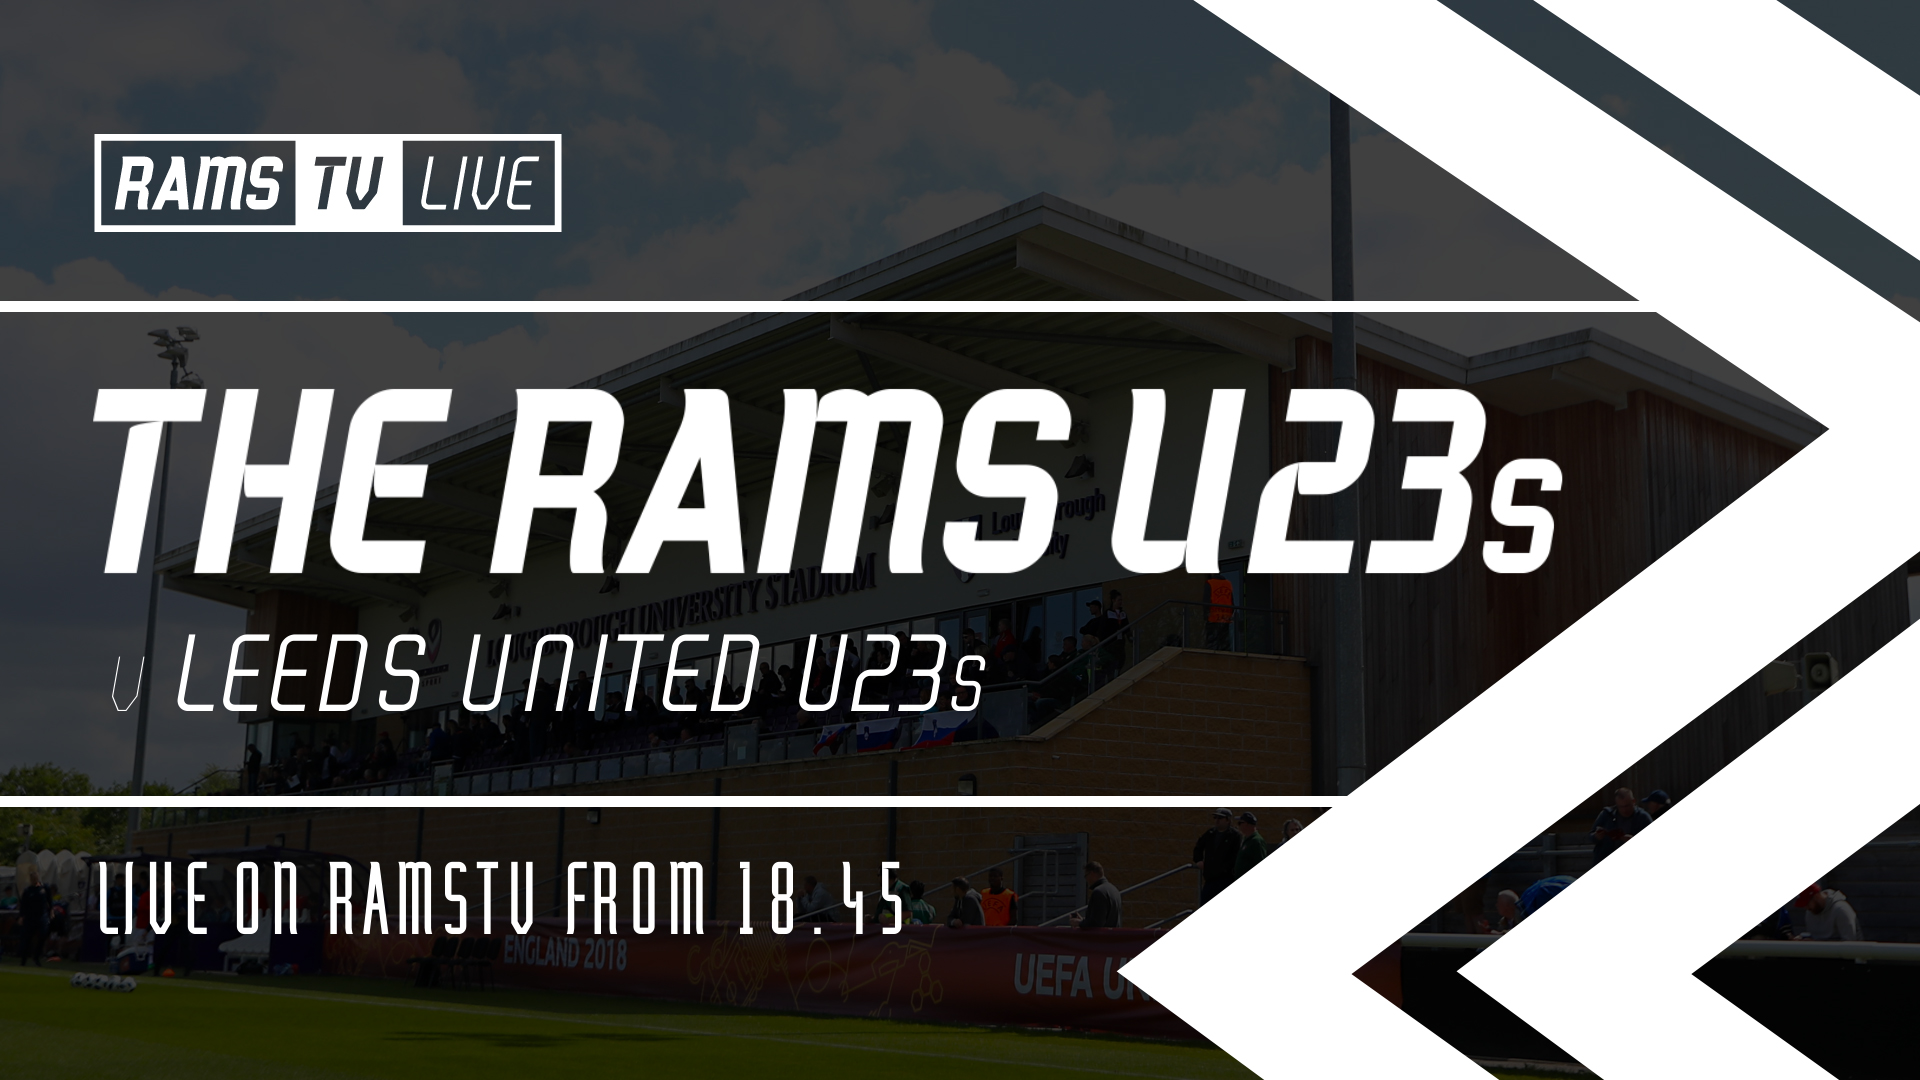 Derby County U23s Vs Leeds United U23s Available To Watch For FREE On RamsTV - Blog